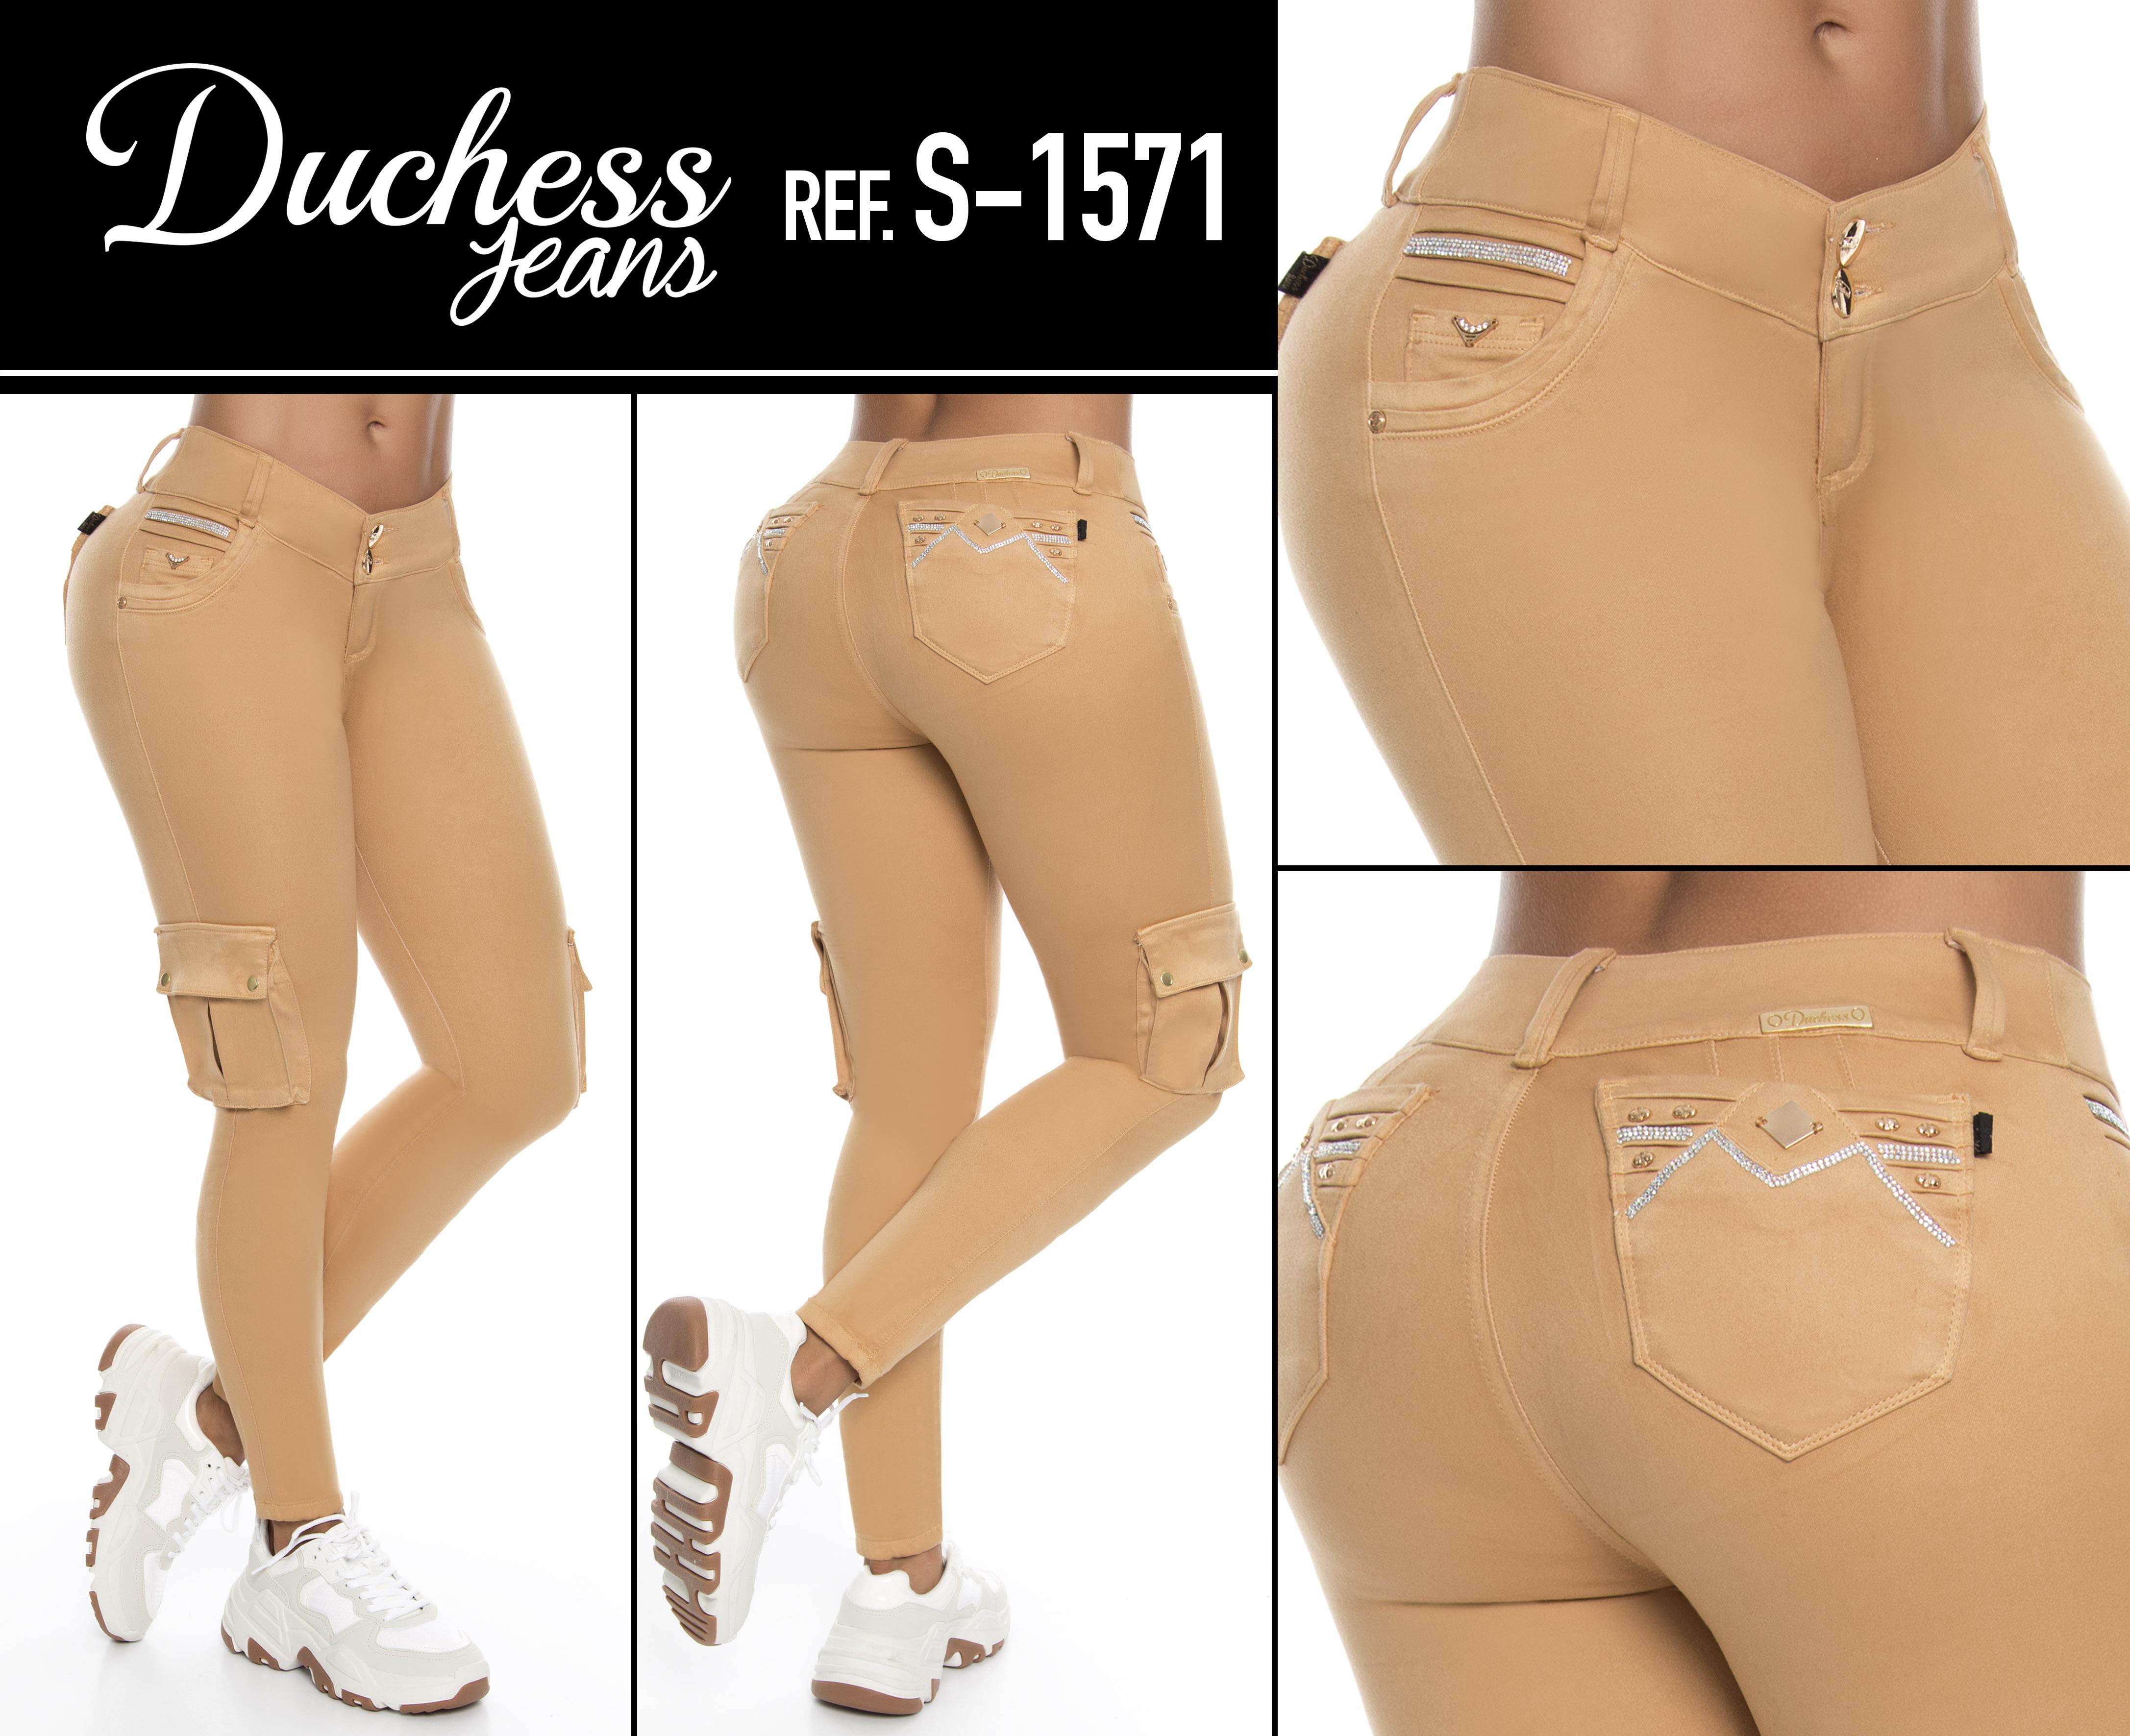 Cowboy Colombian Lady Lift Duchess Brand with Cargo style side pockets